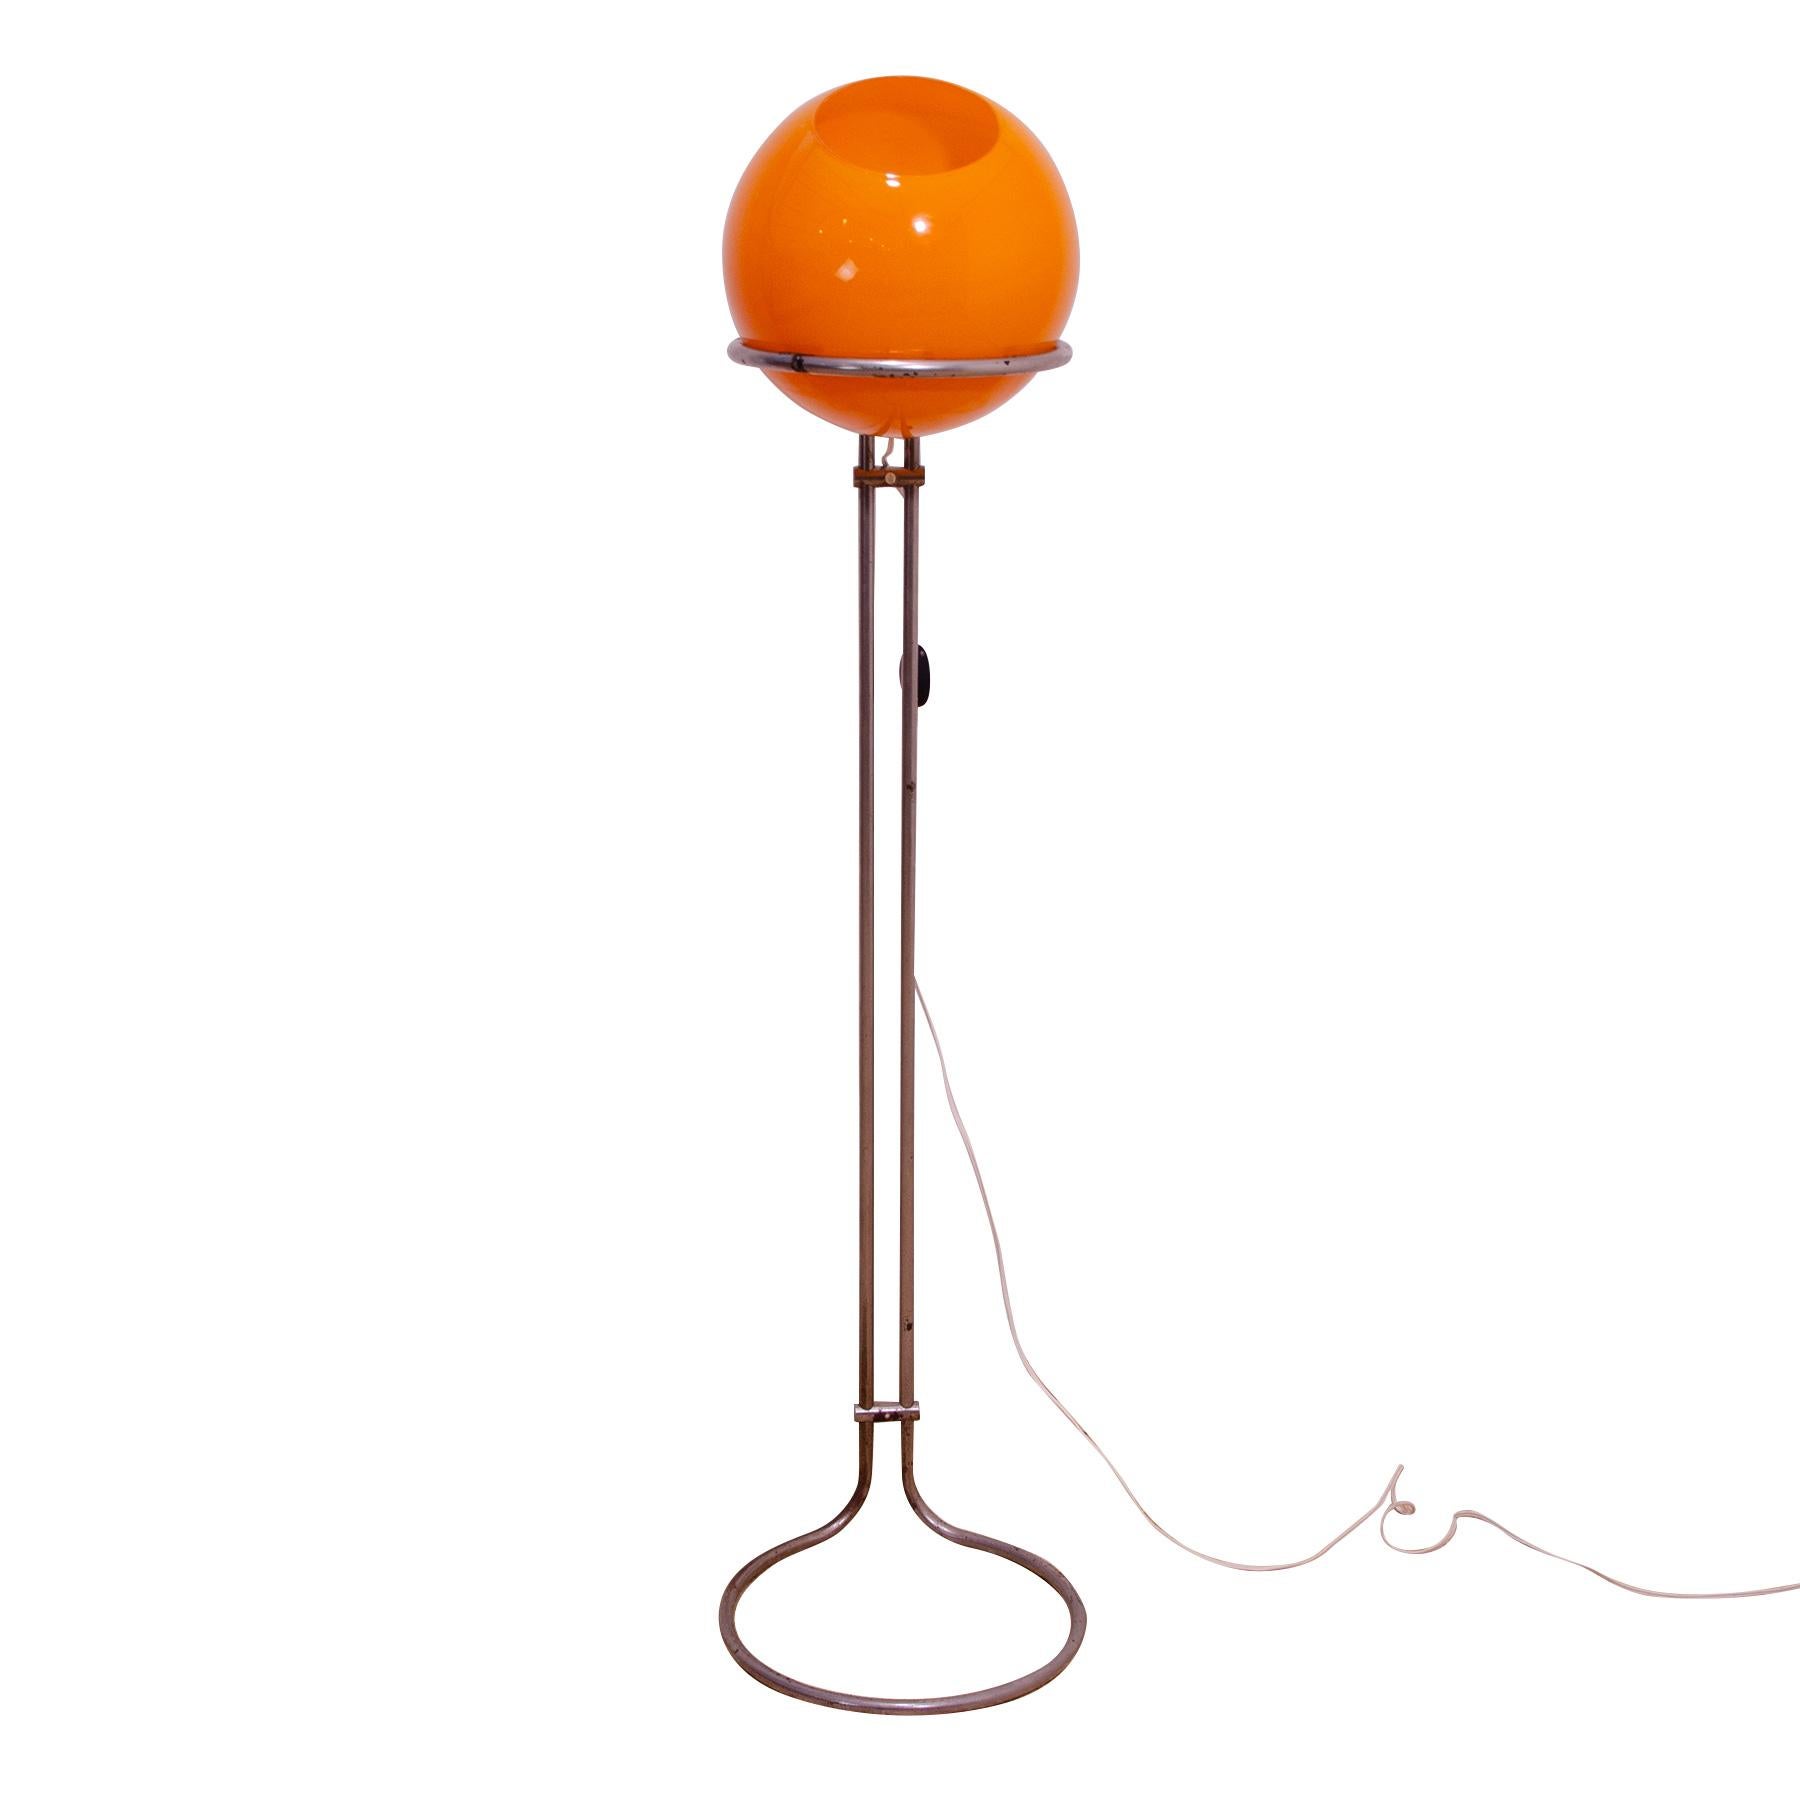 This atomic age floor lamp was designed in 1973 by Hungarian designer Tibor Hazi and made in Hungary in the 1970s.

The lamp is made of orange opaque glass with a matte surface and and a chrome construction.
The rounded shape of the lamp is related